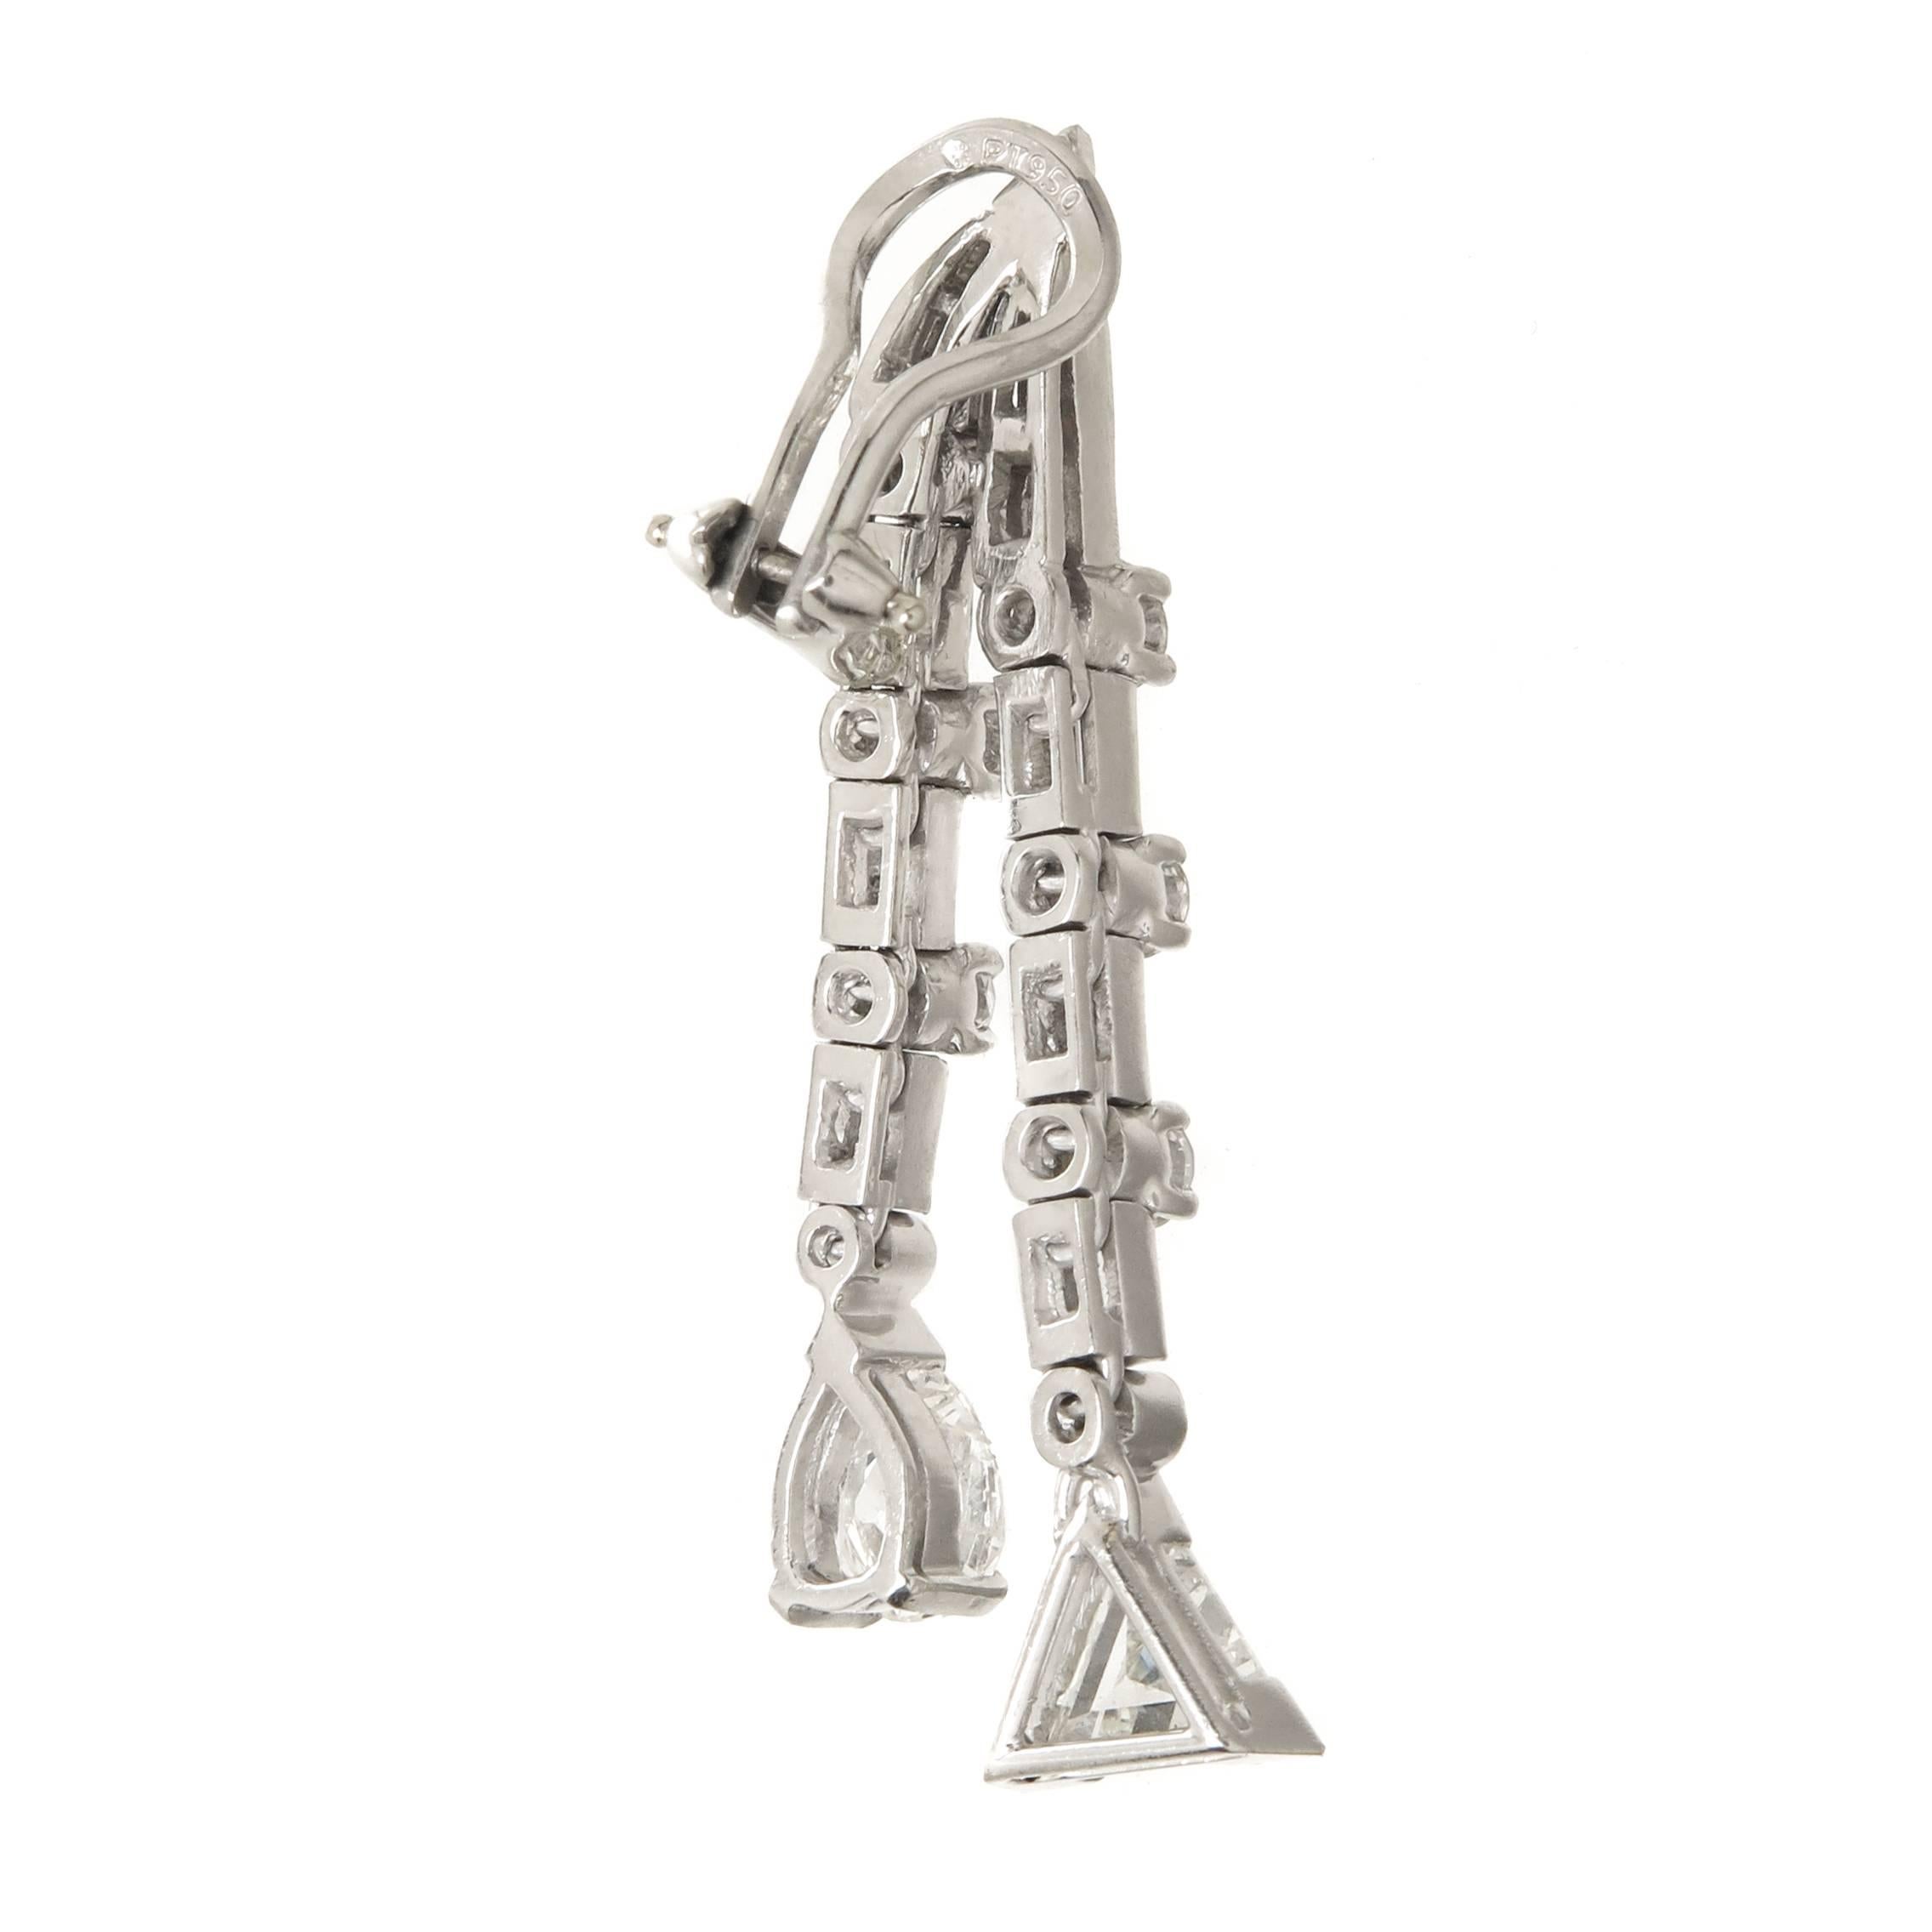 Circa 1940s Platinum Dangle Drop Earrings, measuring 1 1/2 inch in length and set with Pear, Trillion, Round and Baguette Diamonds totaling 4.50 carats and grading as G -H in Color and VS in Clarity.  Having Omega clip backs to which a post can be